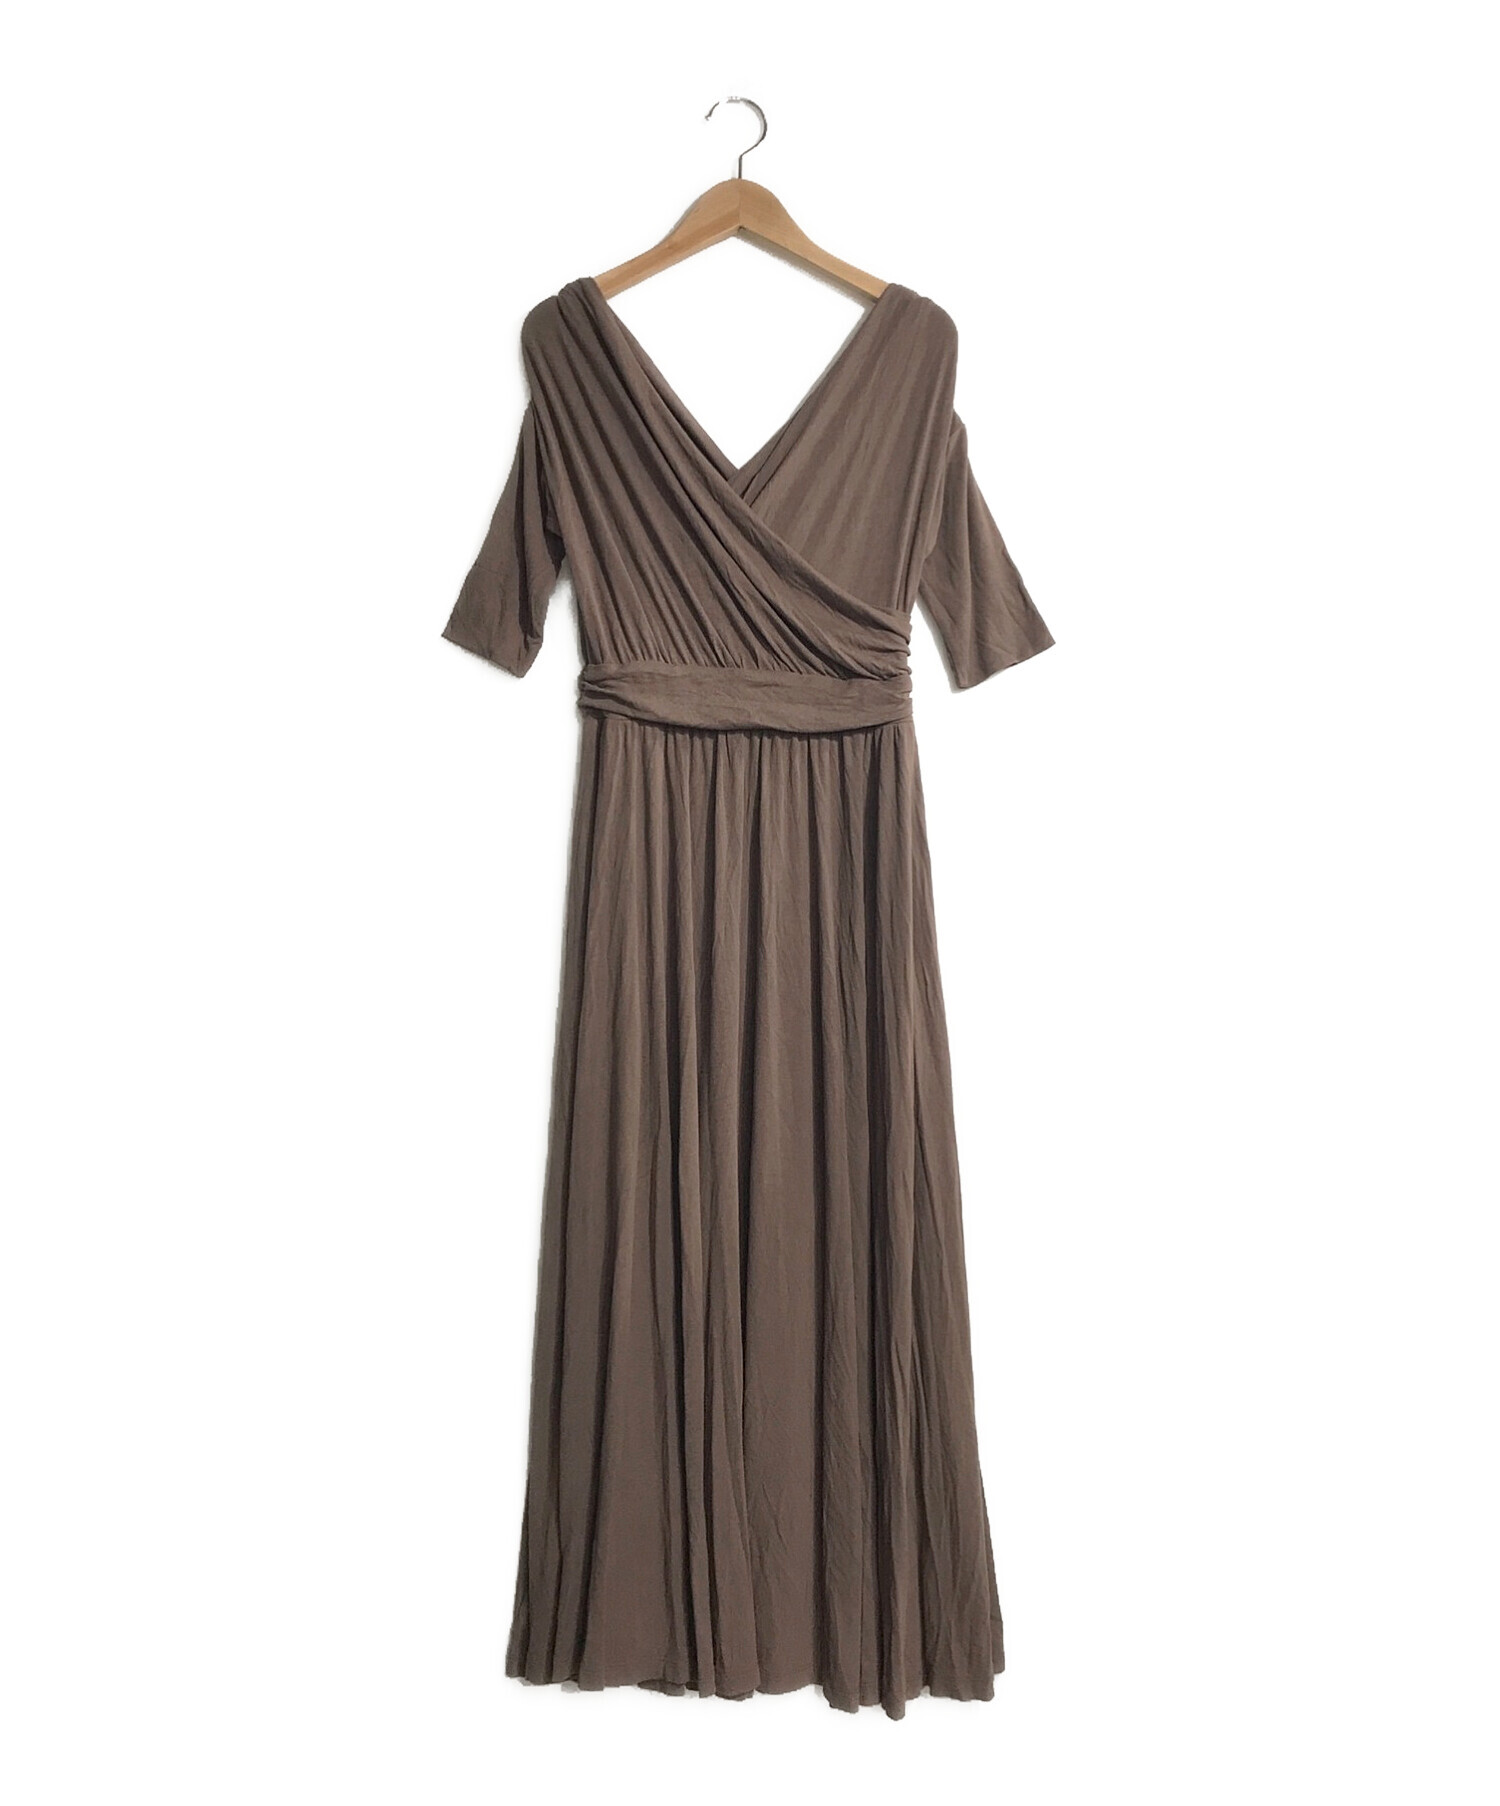 Her lip to Pleated Long Dress  brown-sColo